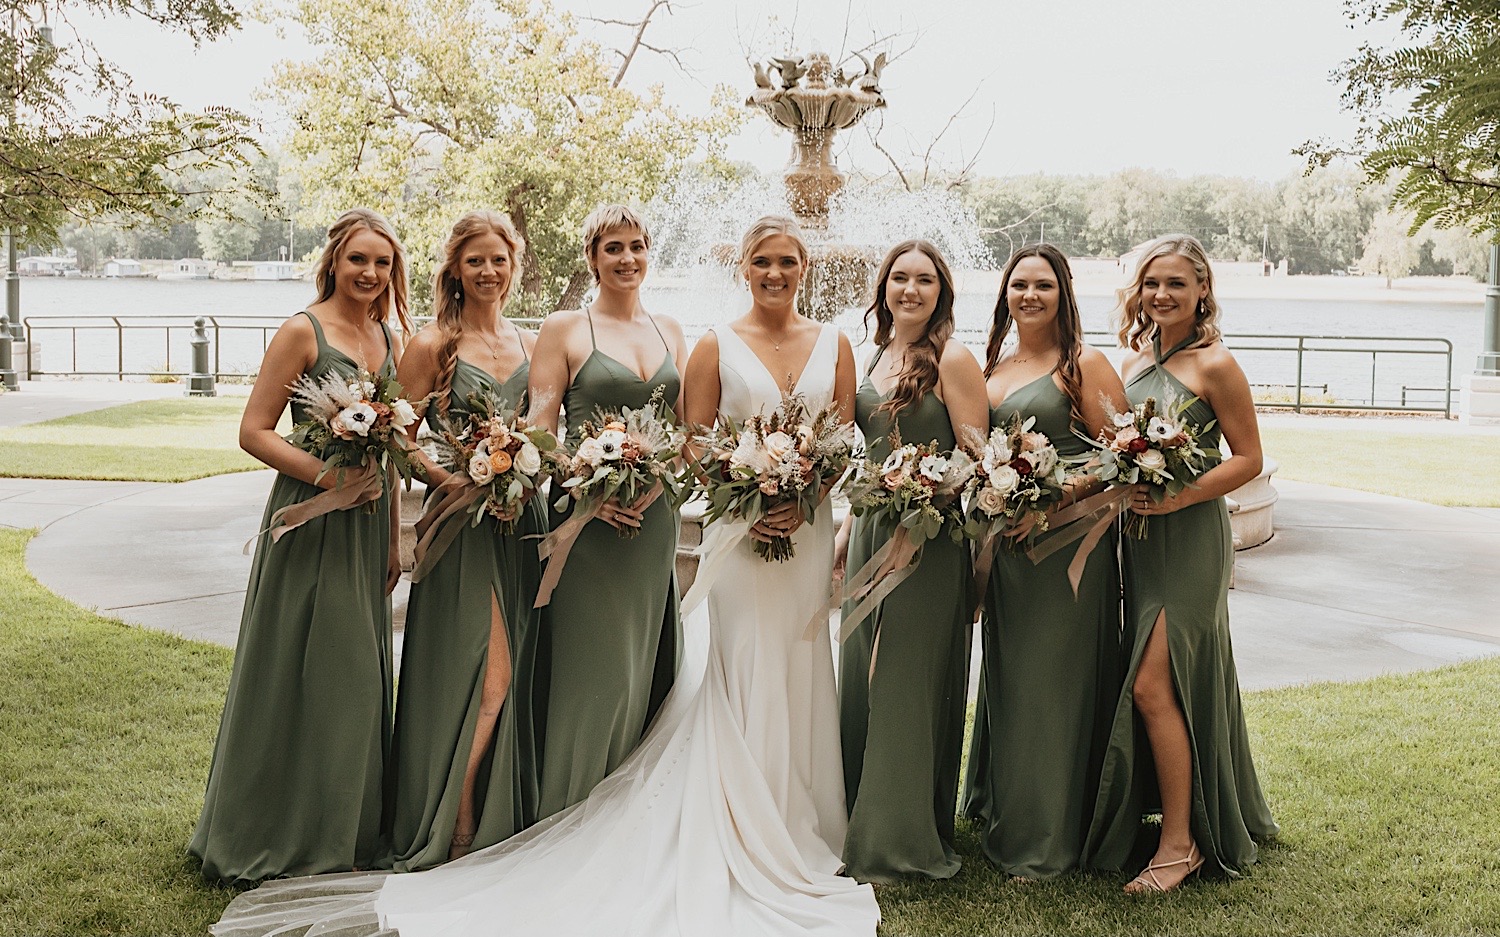 A bride and her bridesmaids smile at the camera while standing in front of a fountain